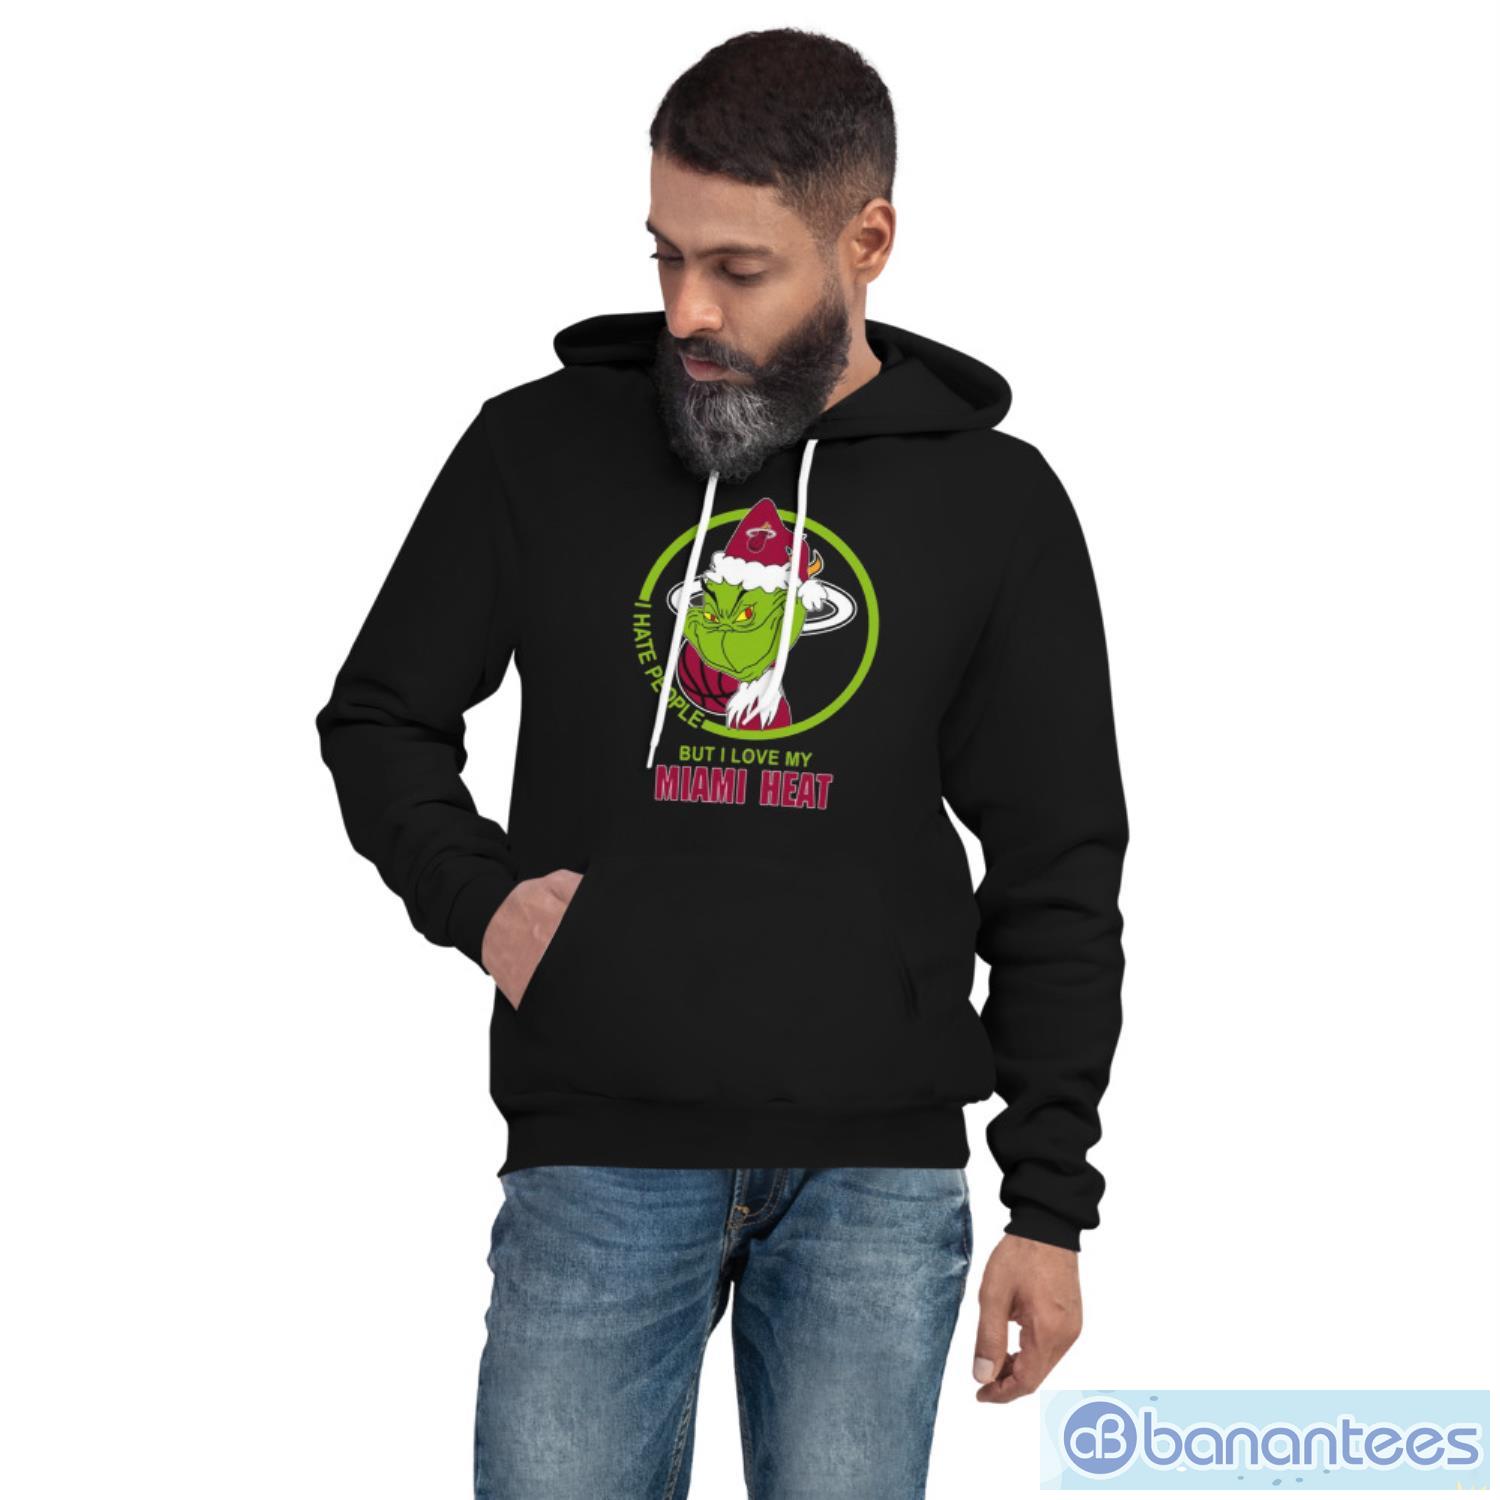 Miami Heat NBA Christmas Grinch I Hate People But I Love My Favorite Basketball Team T Shirt - Unisex Fleece Pullover Hoodie